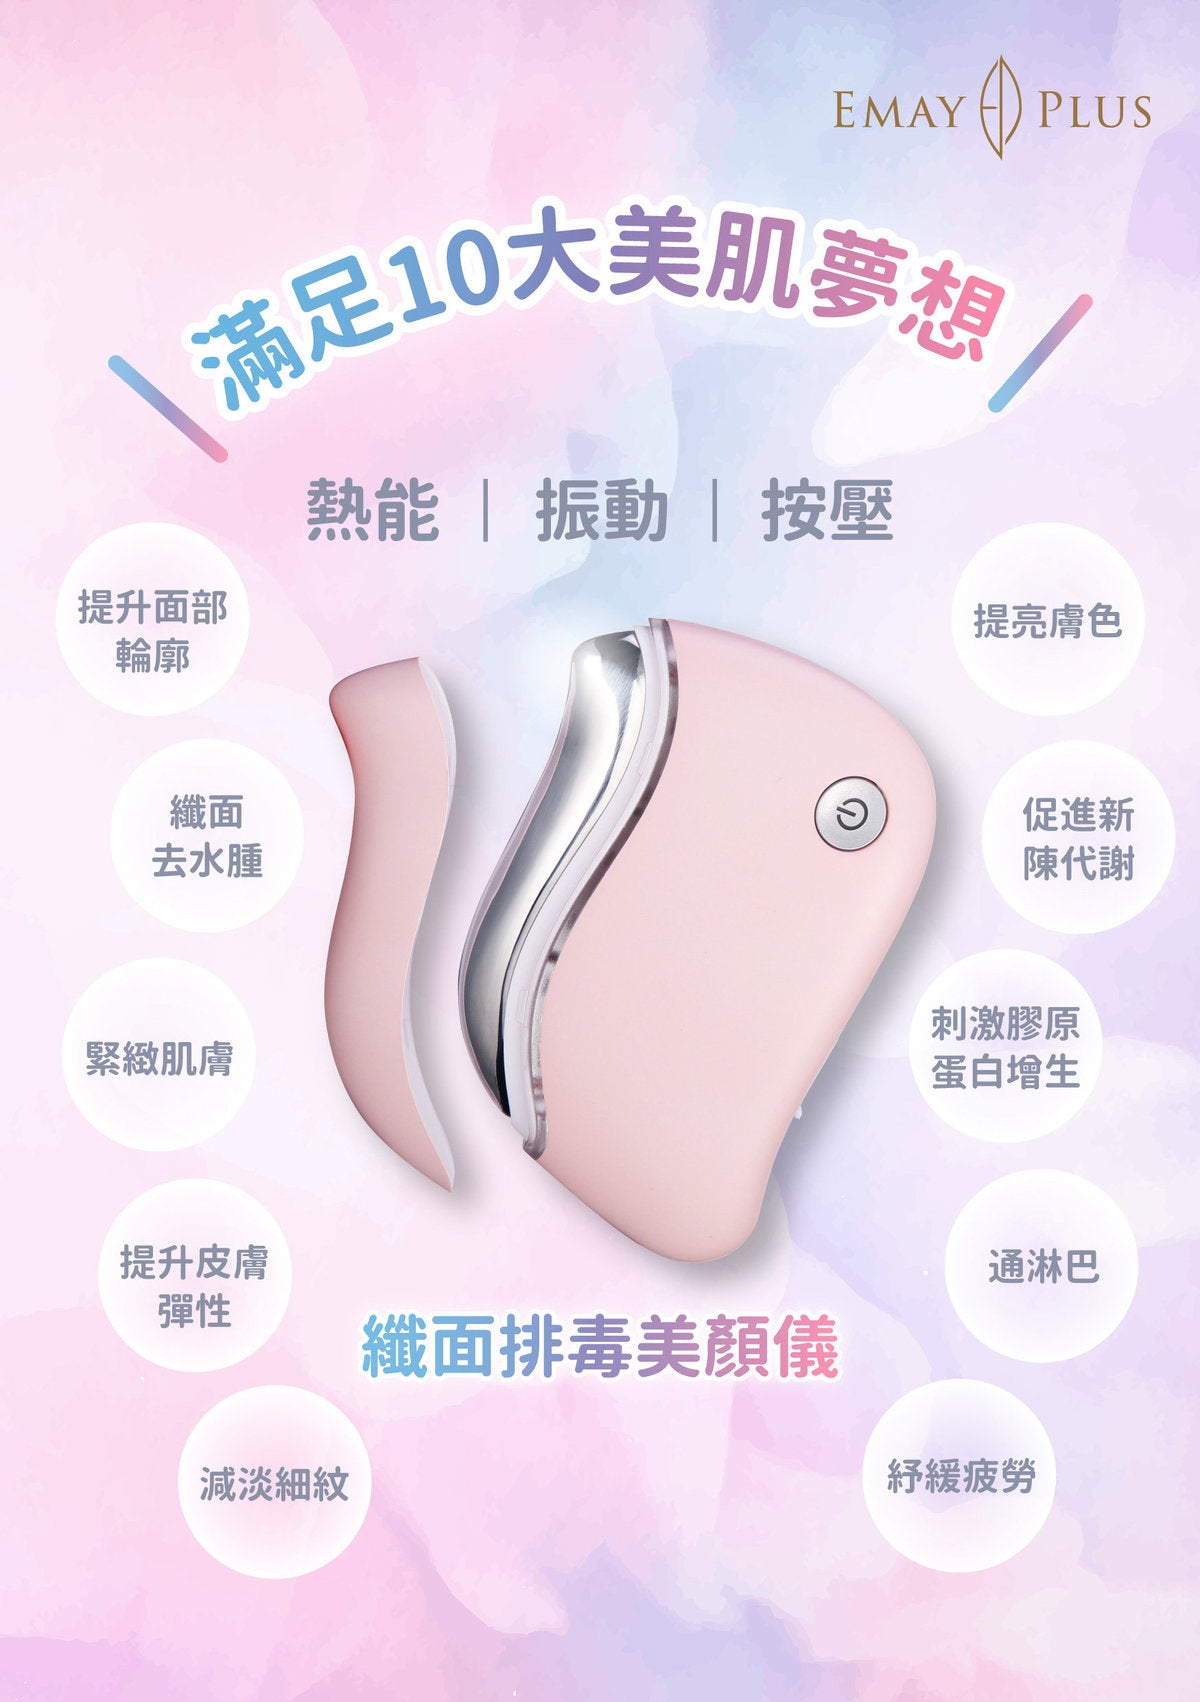 Emay Plus - Face Slimming, Detoxification and Beauty Device EP-406｜V Face Bird｜Detoxification｜Lymphatic relief｜Reduce fine lines｜Facial Massage - Pink Purple 